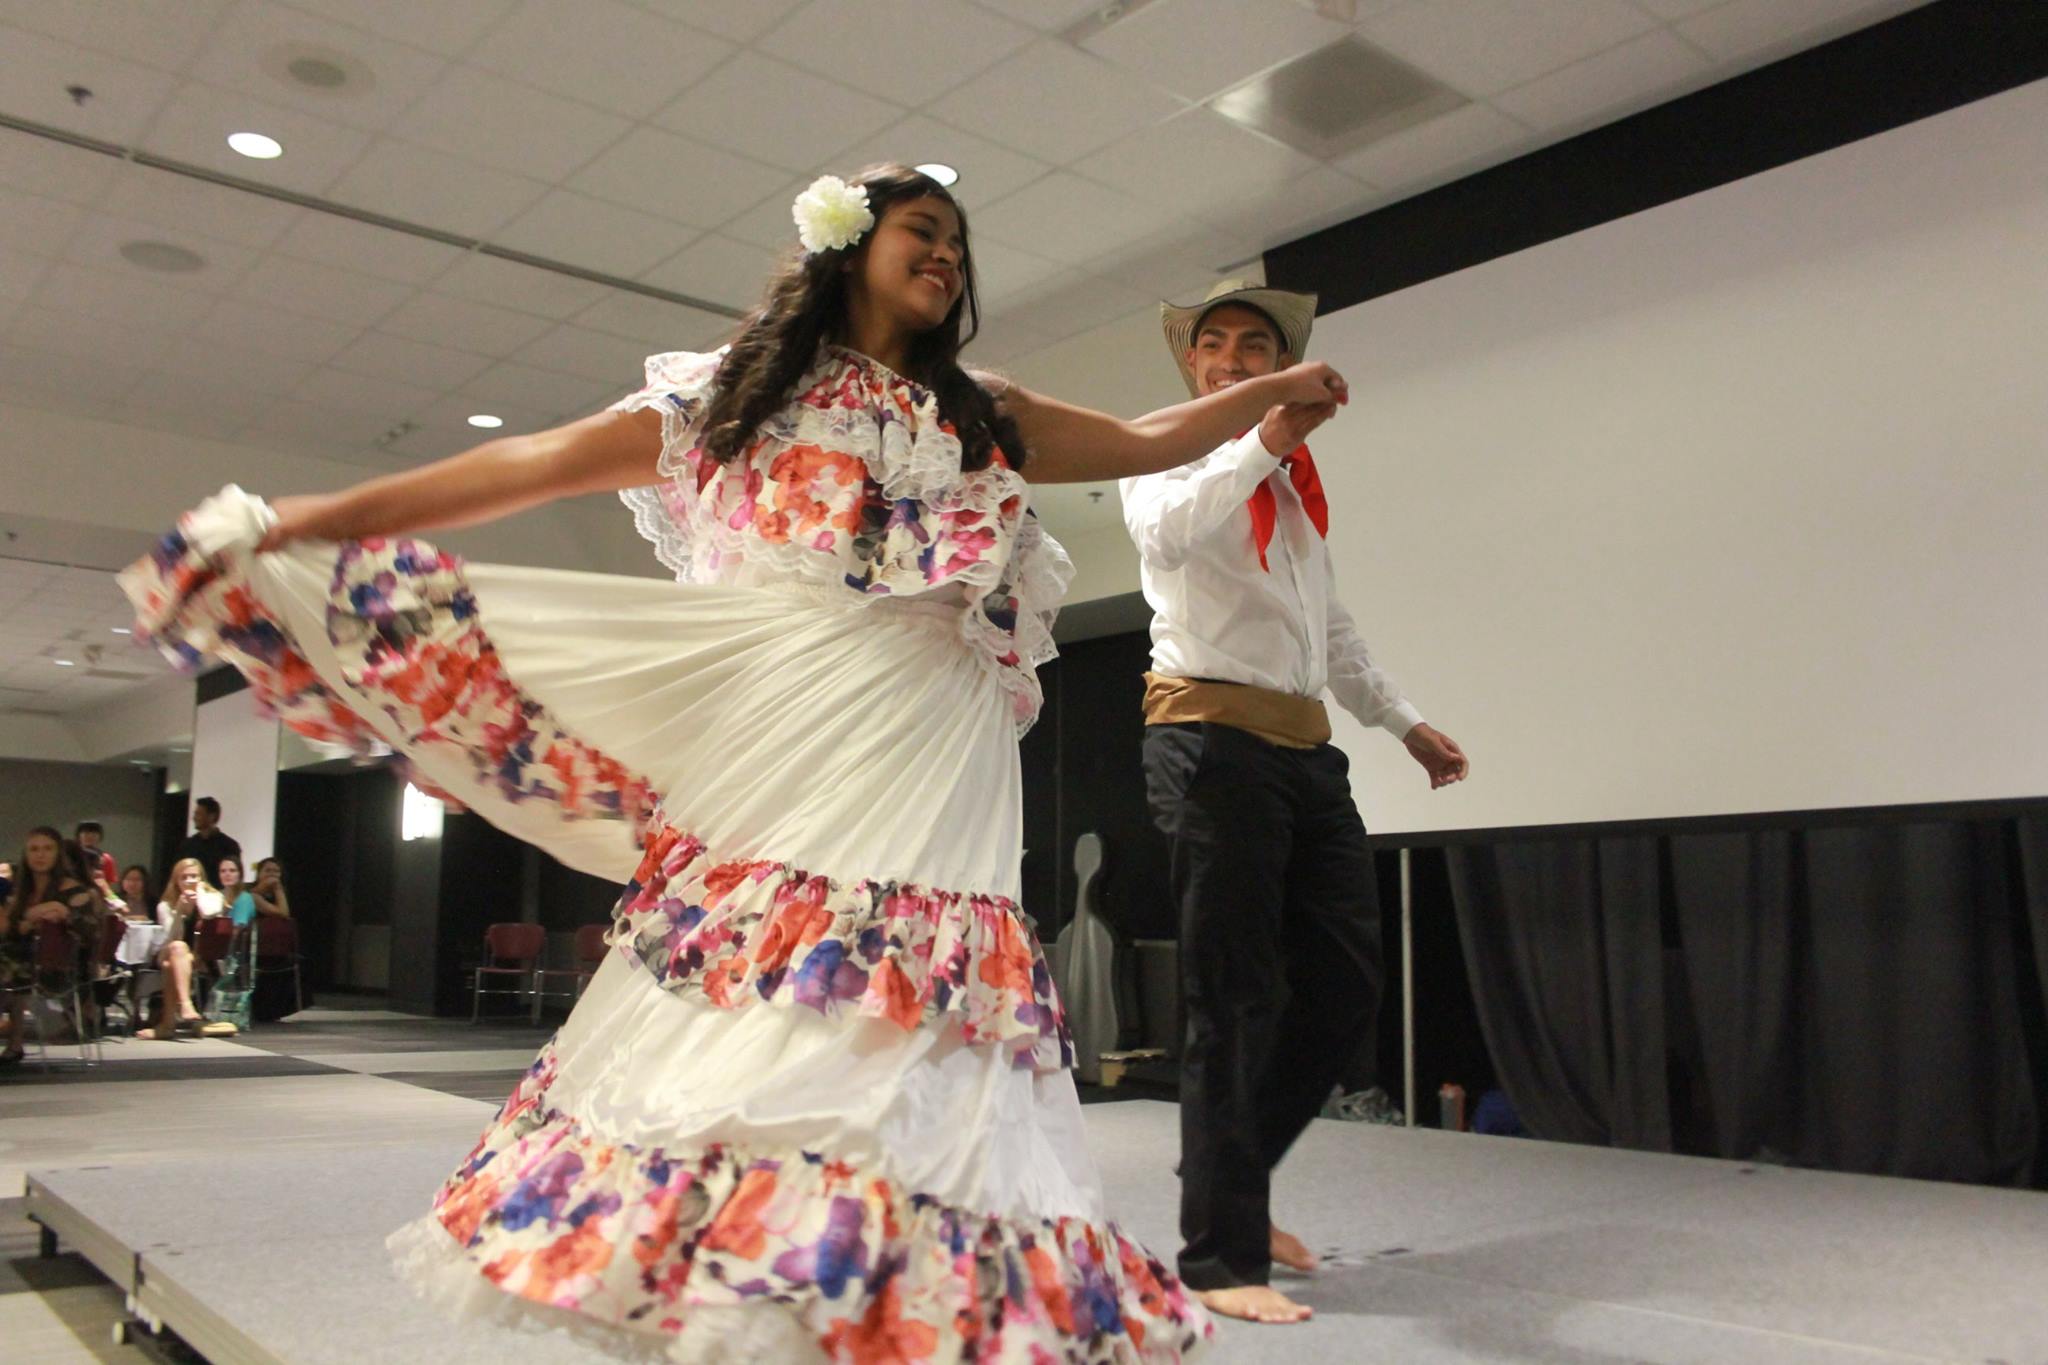 Talented students showcased their cultures during the 3rd annual Carnaval Banquet and Show.